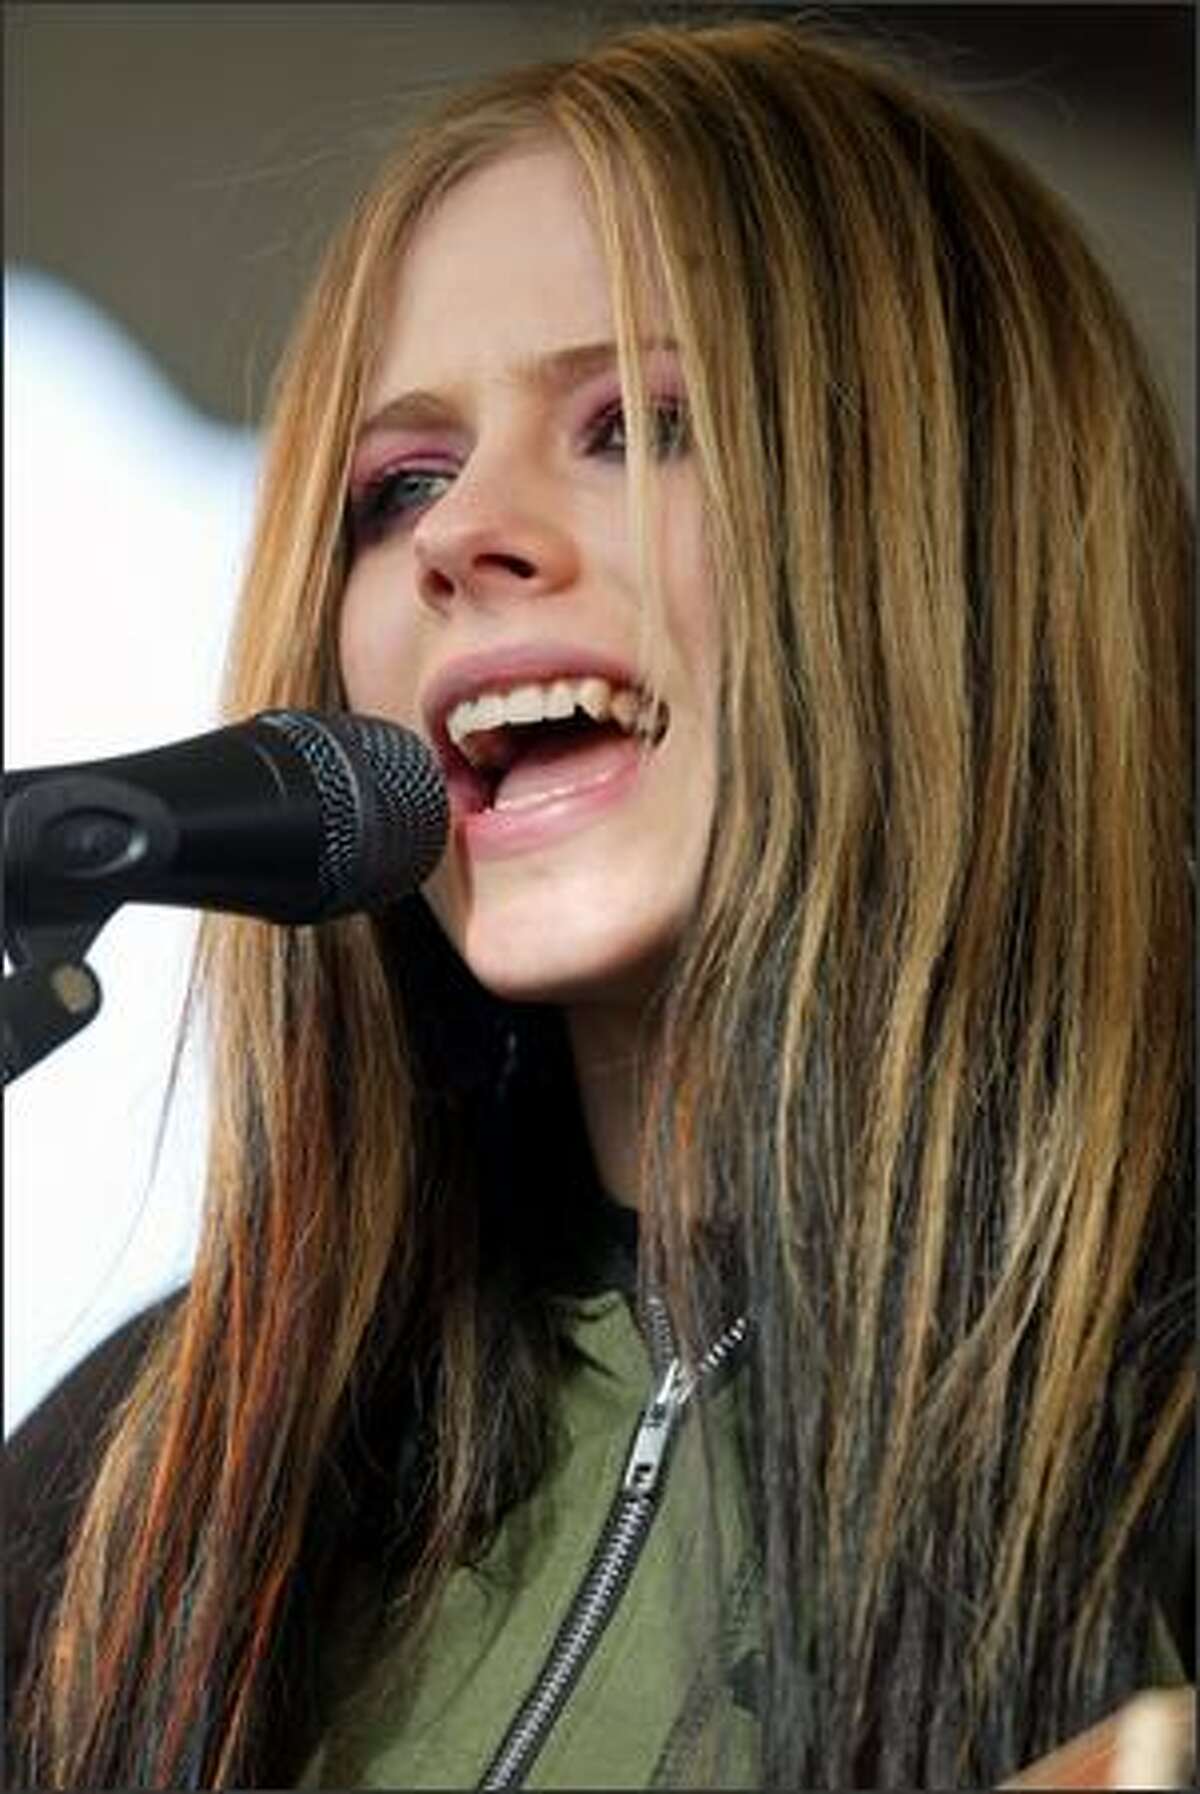 Avril Lavigne during her concert held at Southcenter Mall.